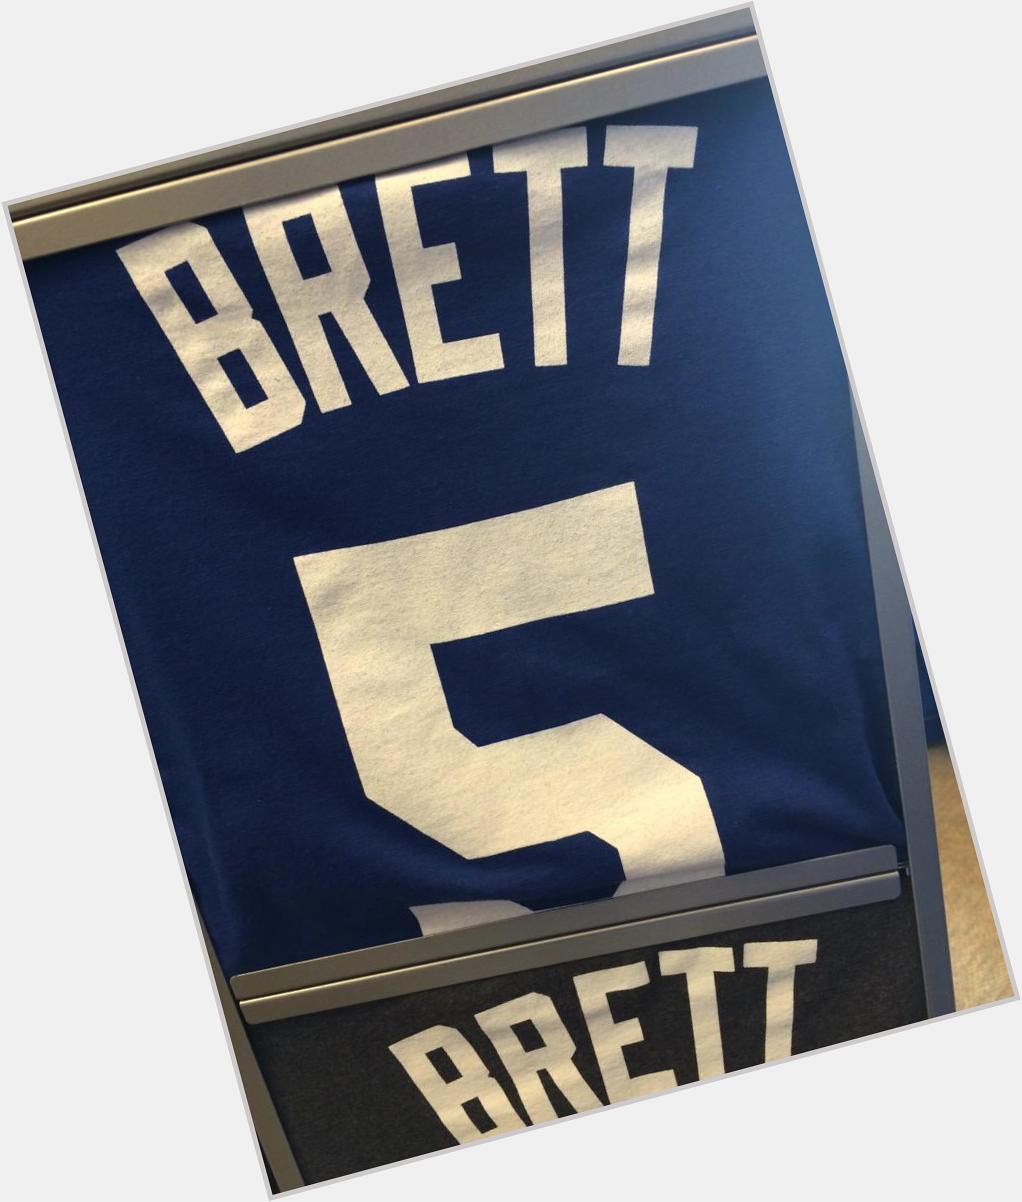 Happy birthday George Brett wearing this tonight in your honor  